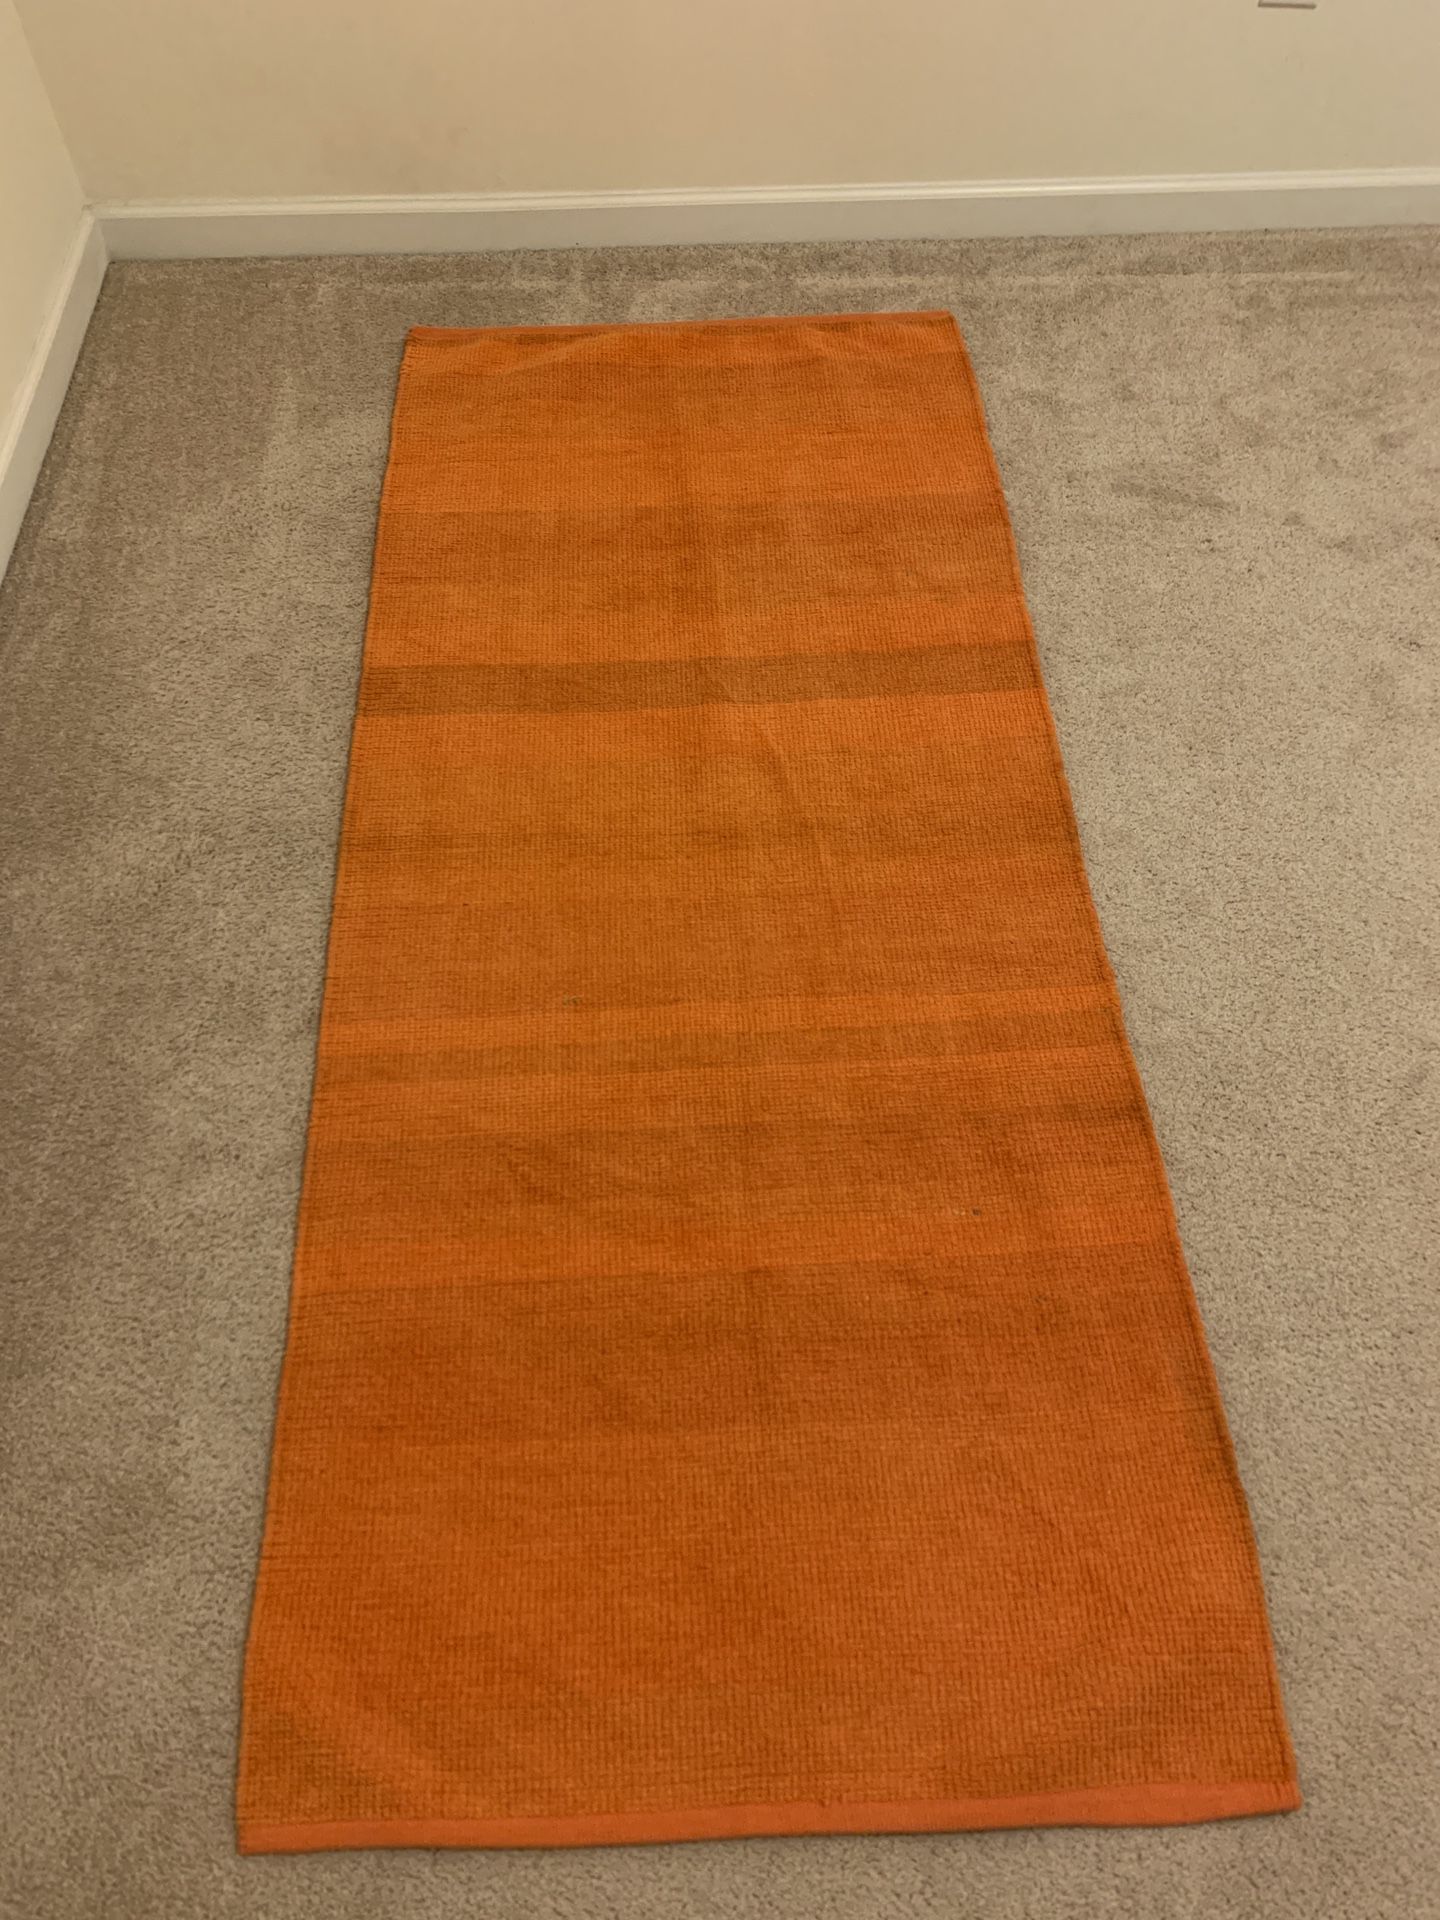 Neet Yoga Works - Washable Cotton Yoga Mat - Natural and Non-Toxic